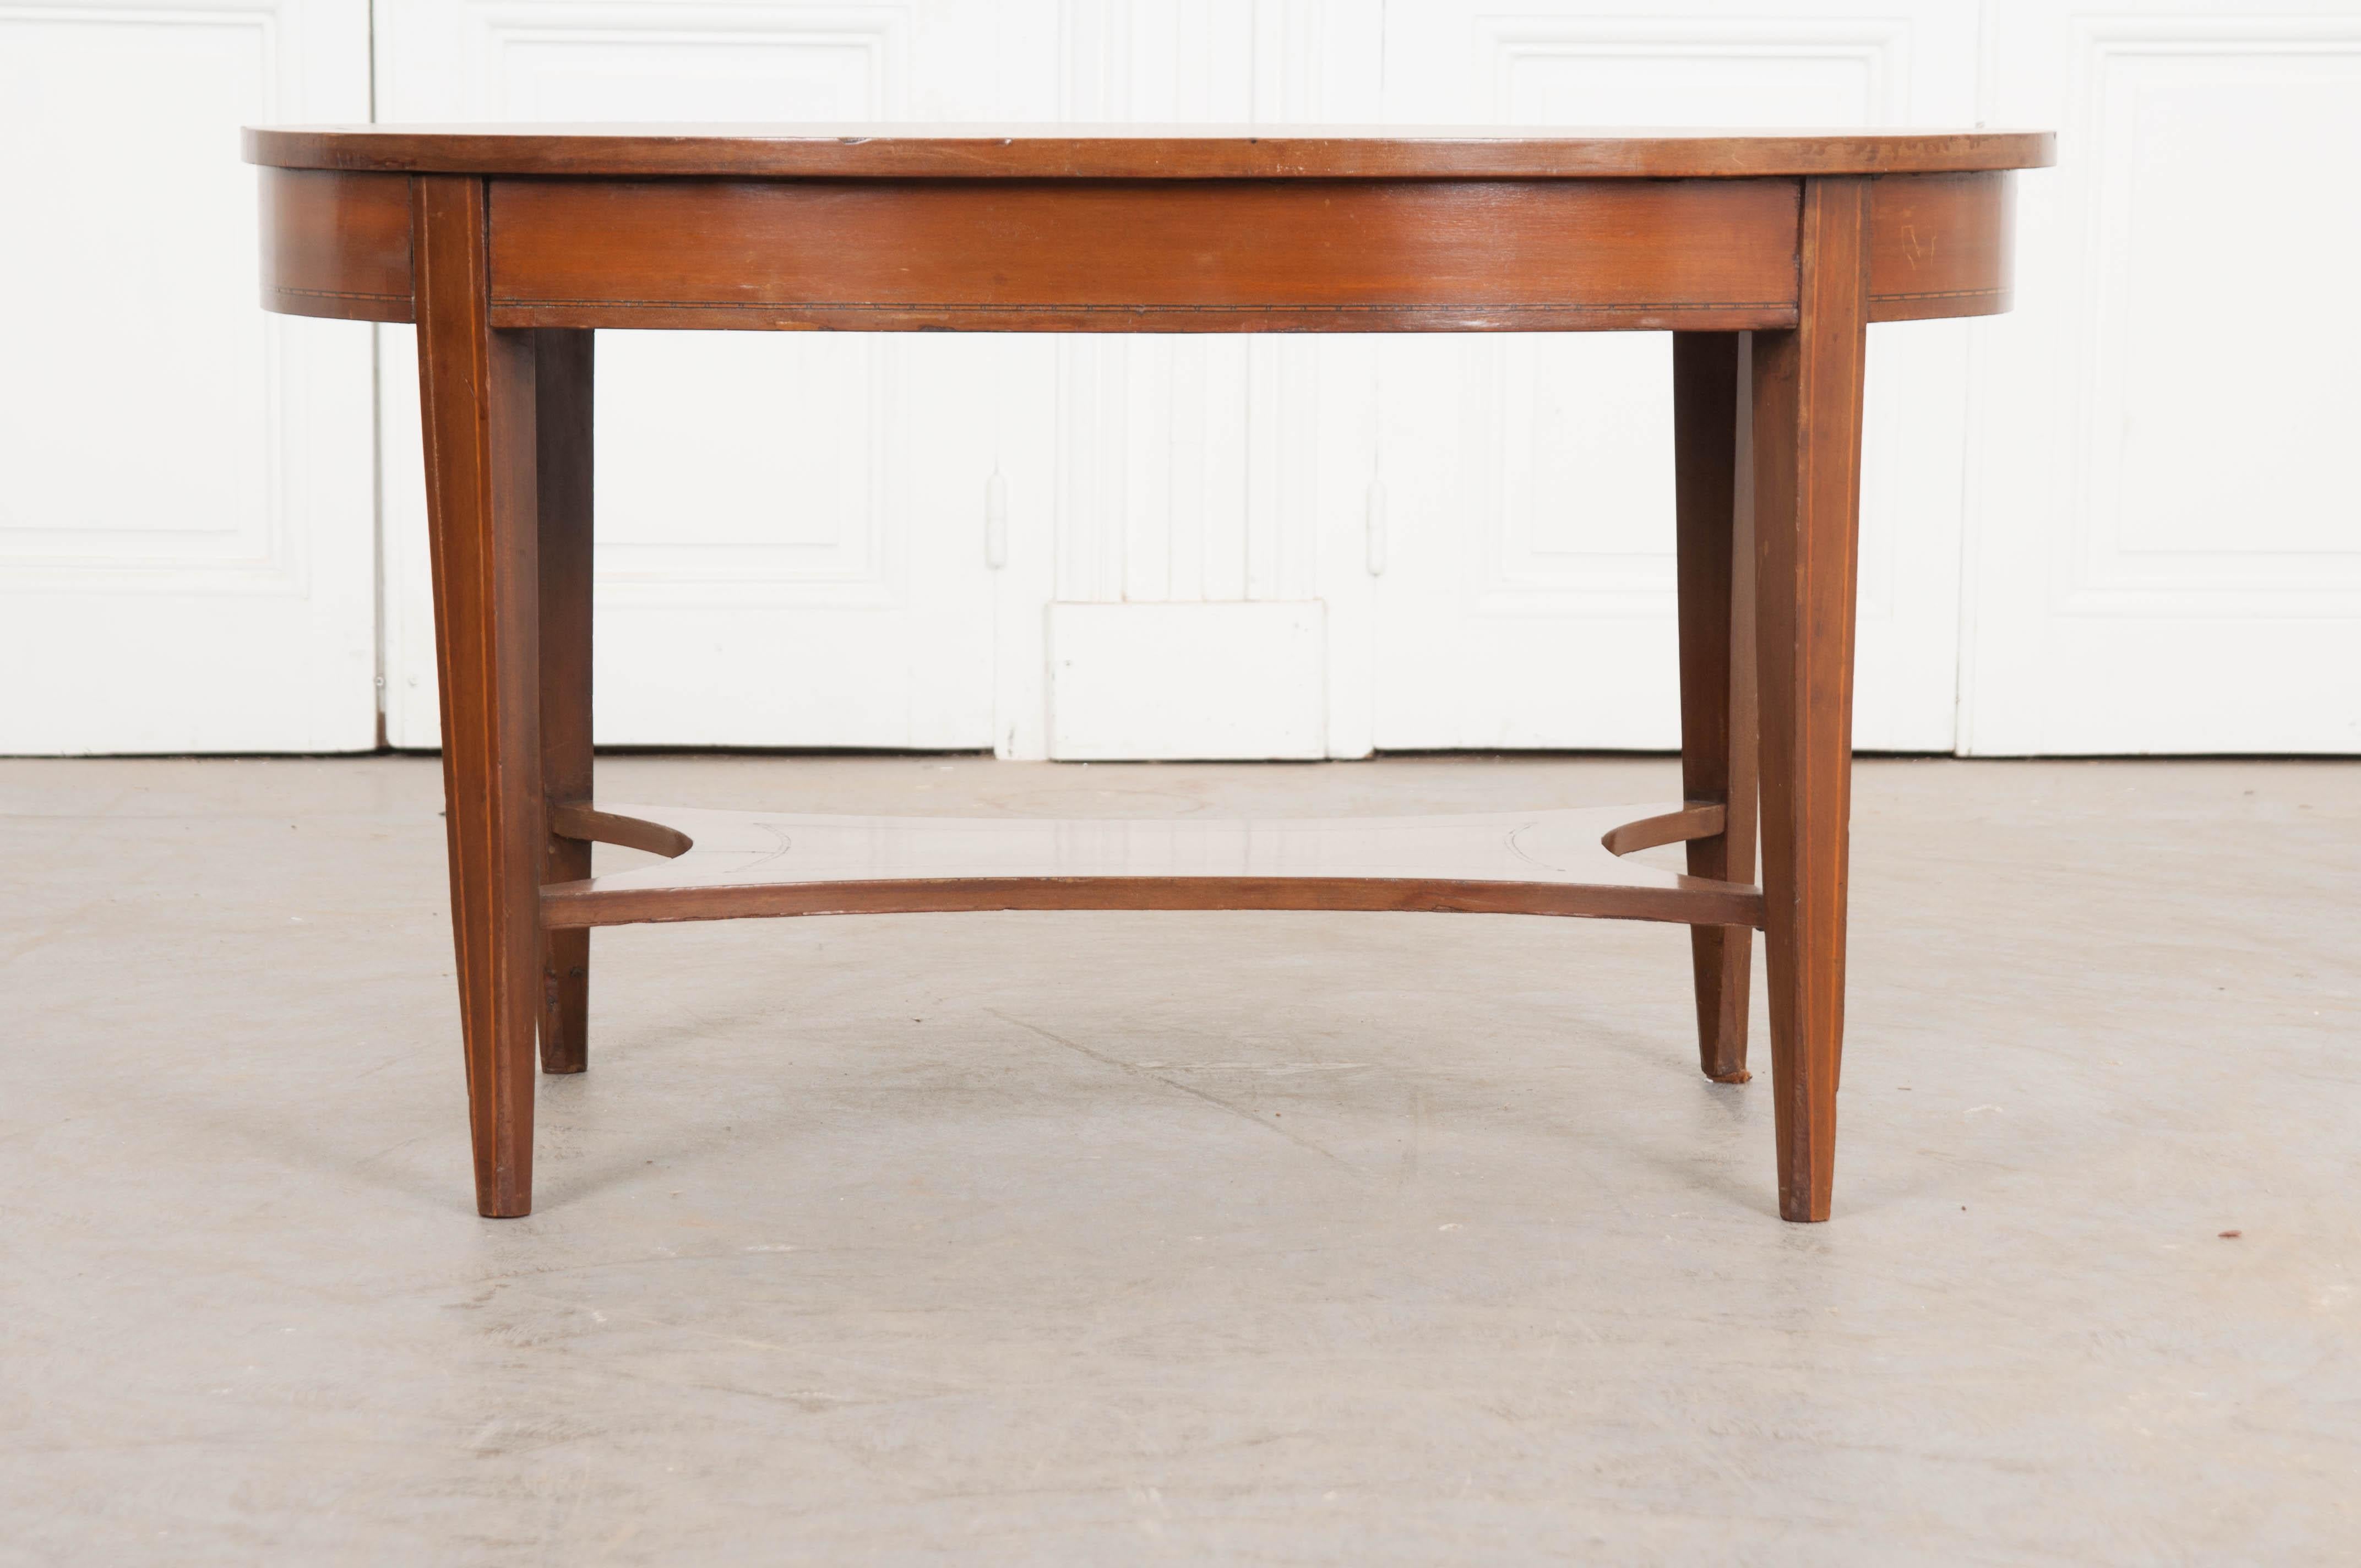 An eye-catching inlay top caps this exceptional mahogany oval coffee table from France. Inspired by the Directoire style, the antique has a subdued elegance that is highly finished while not being ostentatious. A tumbling block motif was inlaid into